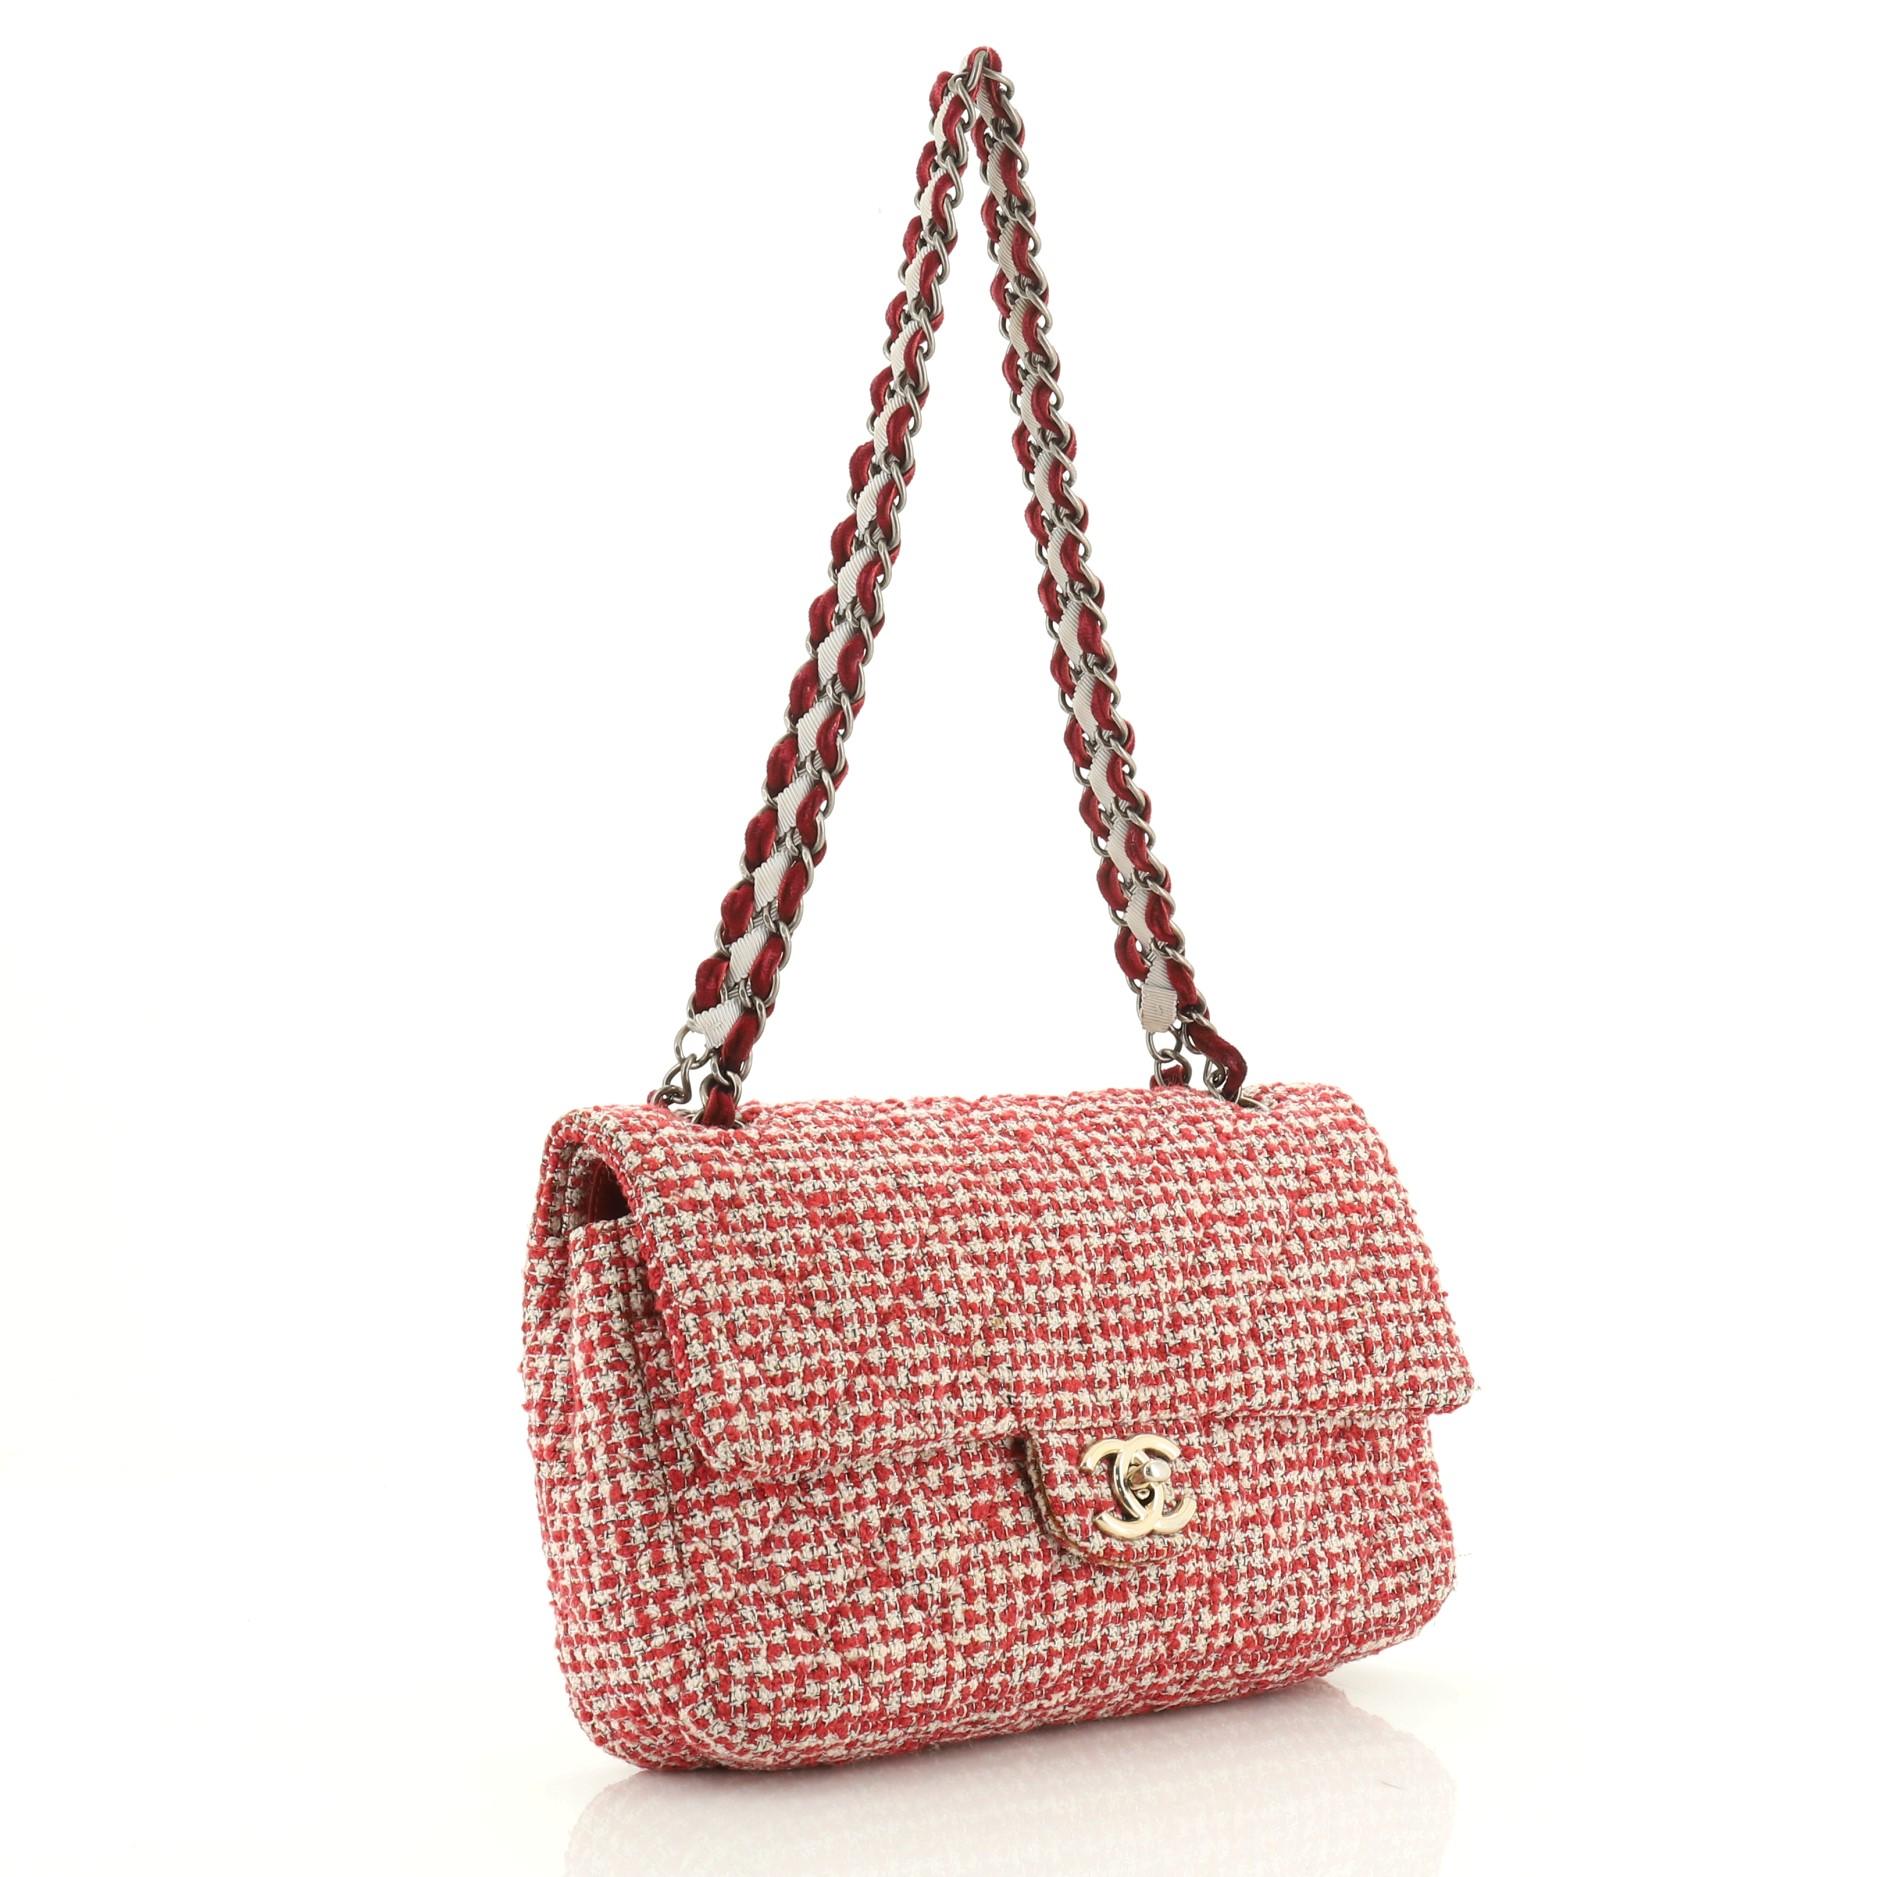 This Chanel Classic Double Flap Bag Quilted Tweed with Velvet Medium, crafted from red and white quilted tweed with velvet, features woven-in velvet chain strap, exterior back pocket, and aged silver and gold-tone hardware. Its double flap and